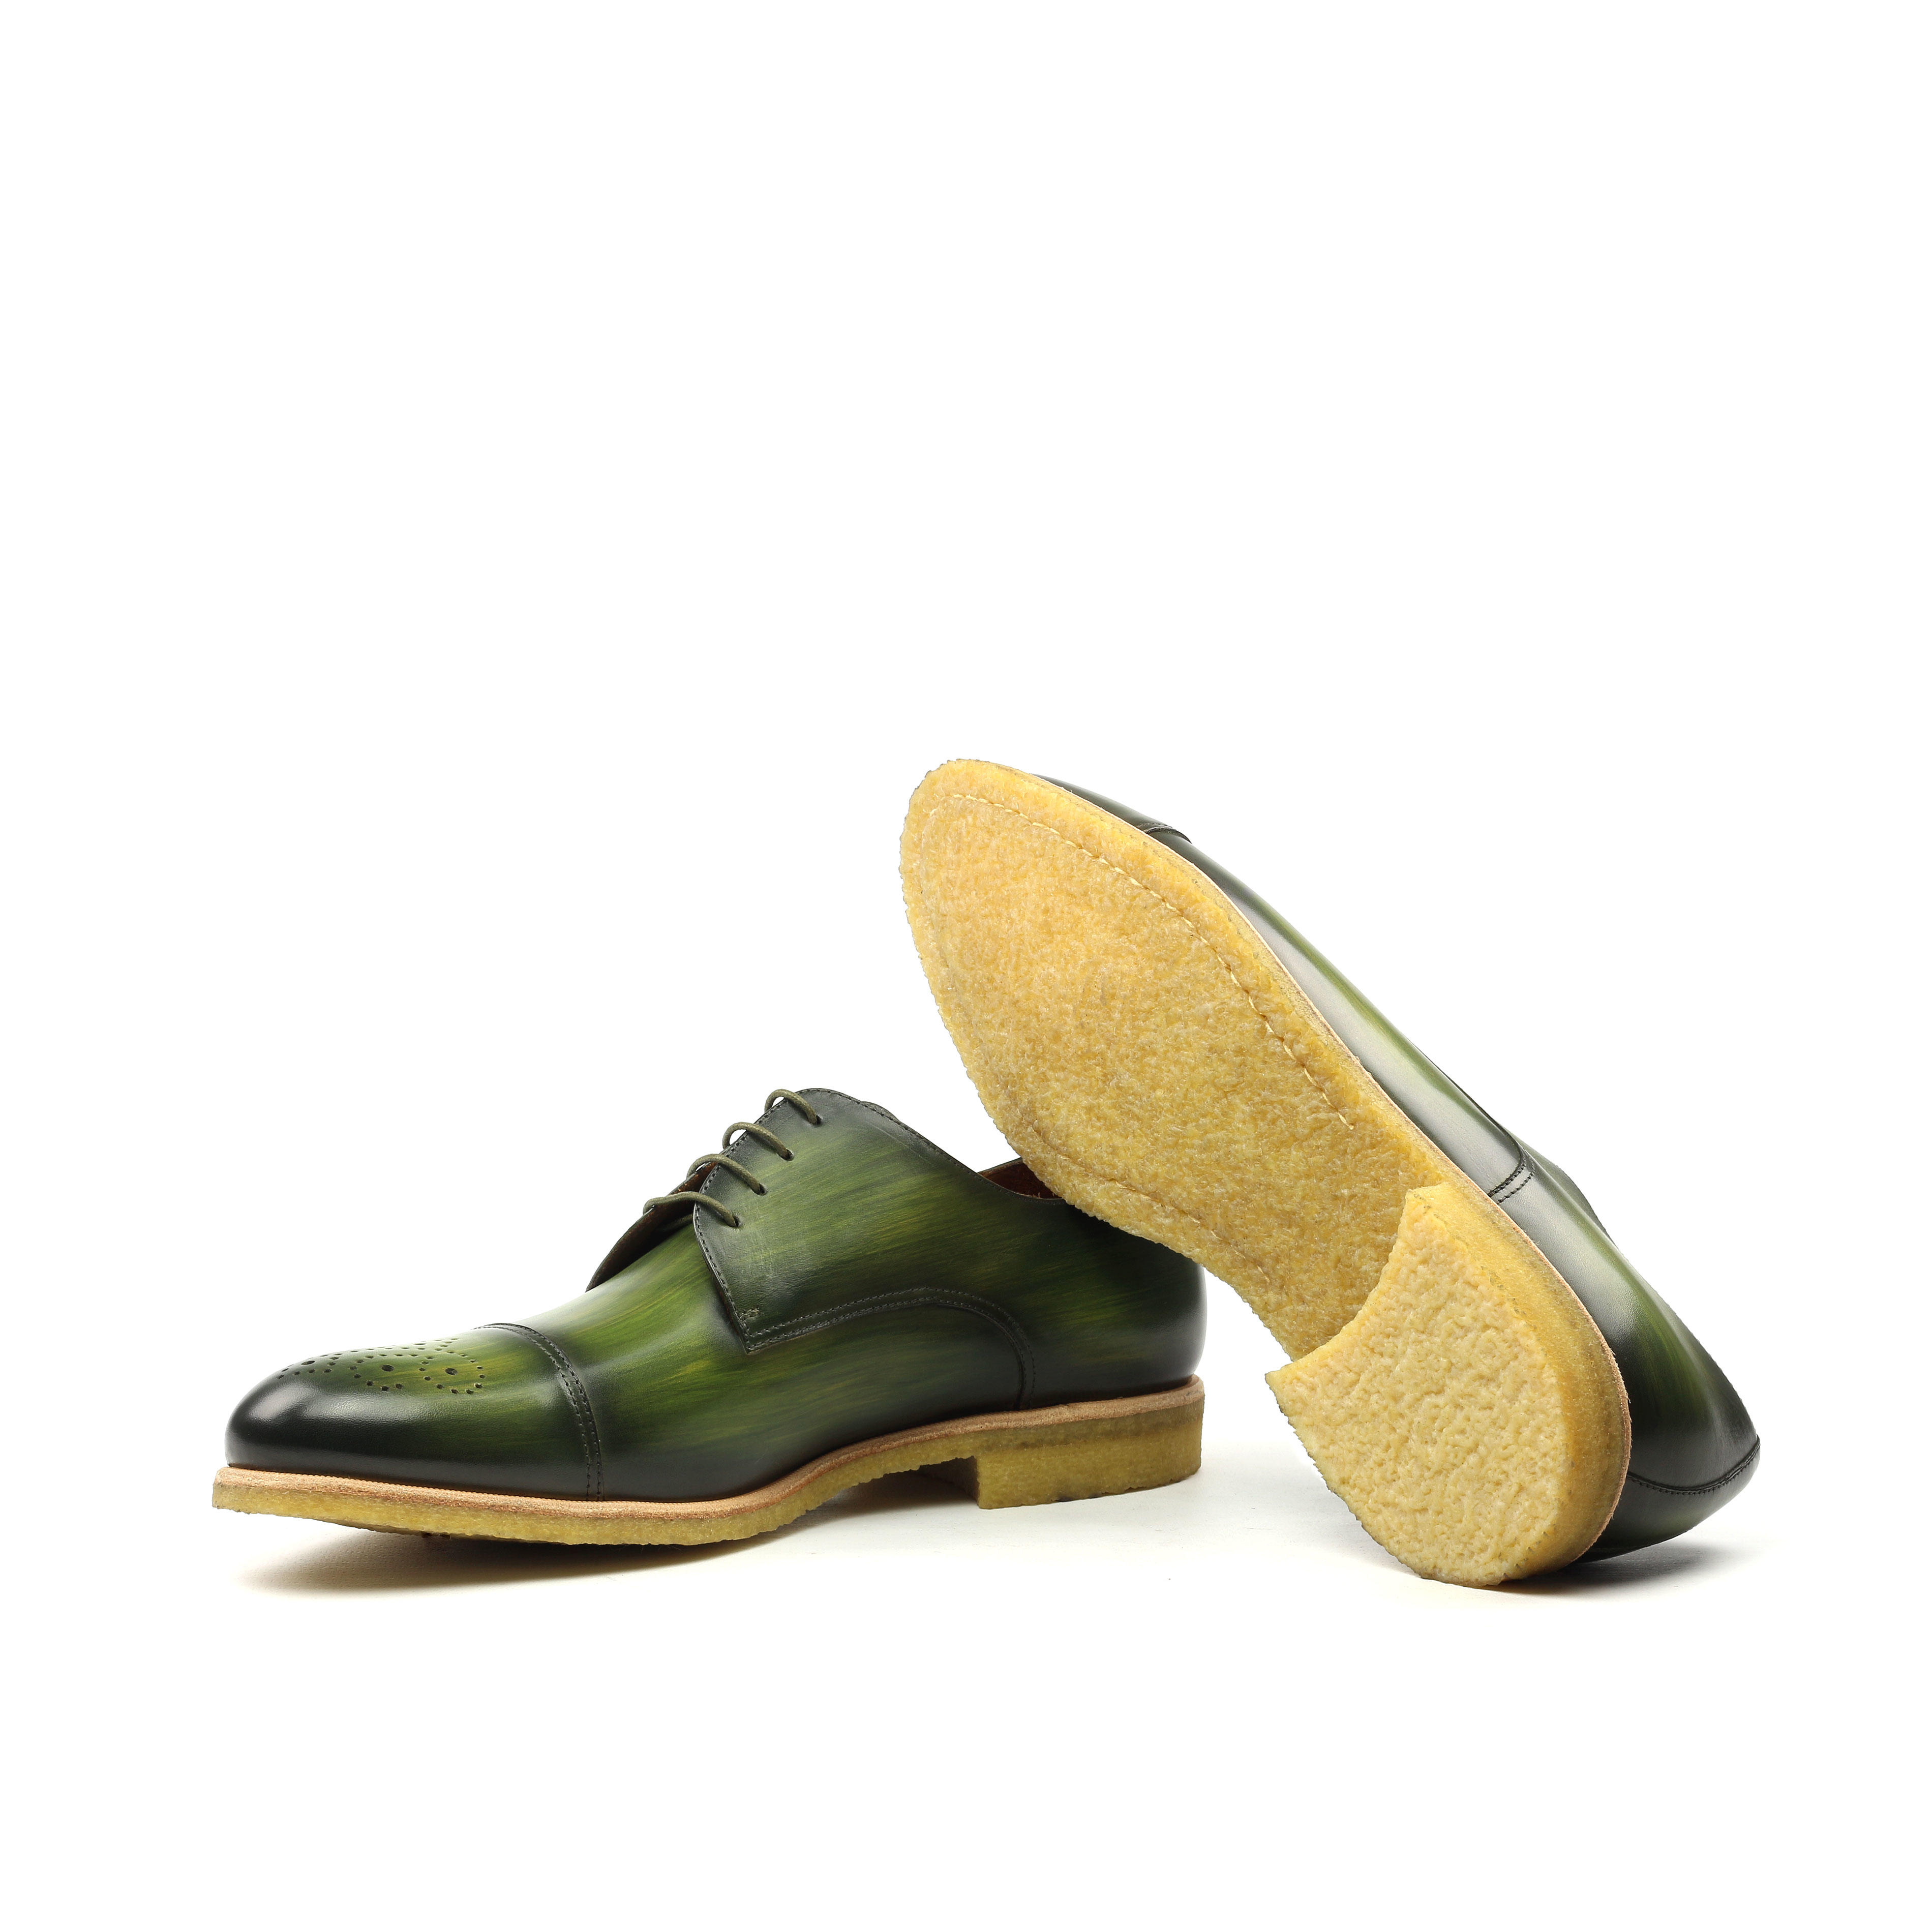 Manor of London 'The Derby'  Khaki Patina Punched Toe Shoe Luxury Custom Initials Monogrammed Bottom Top  View